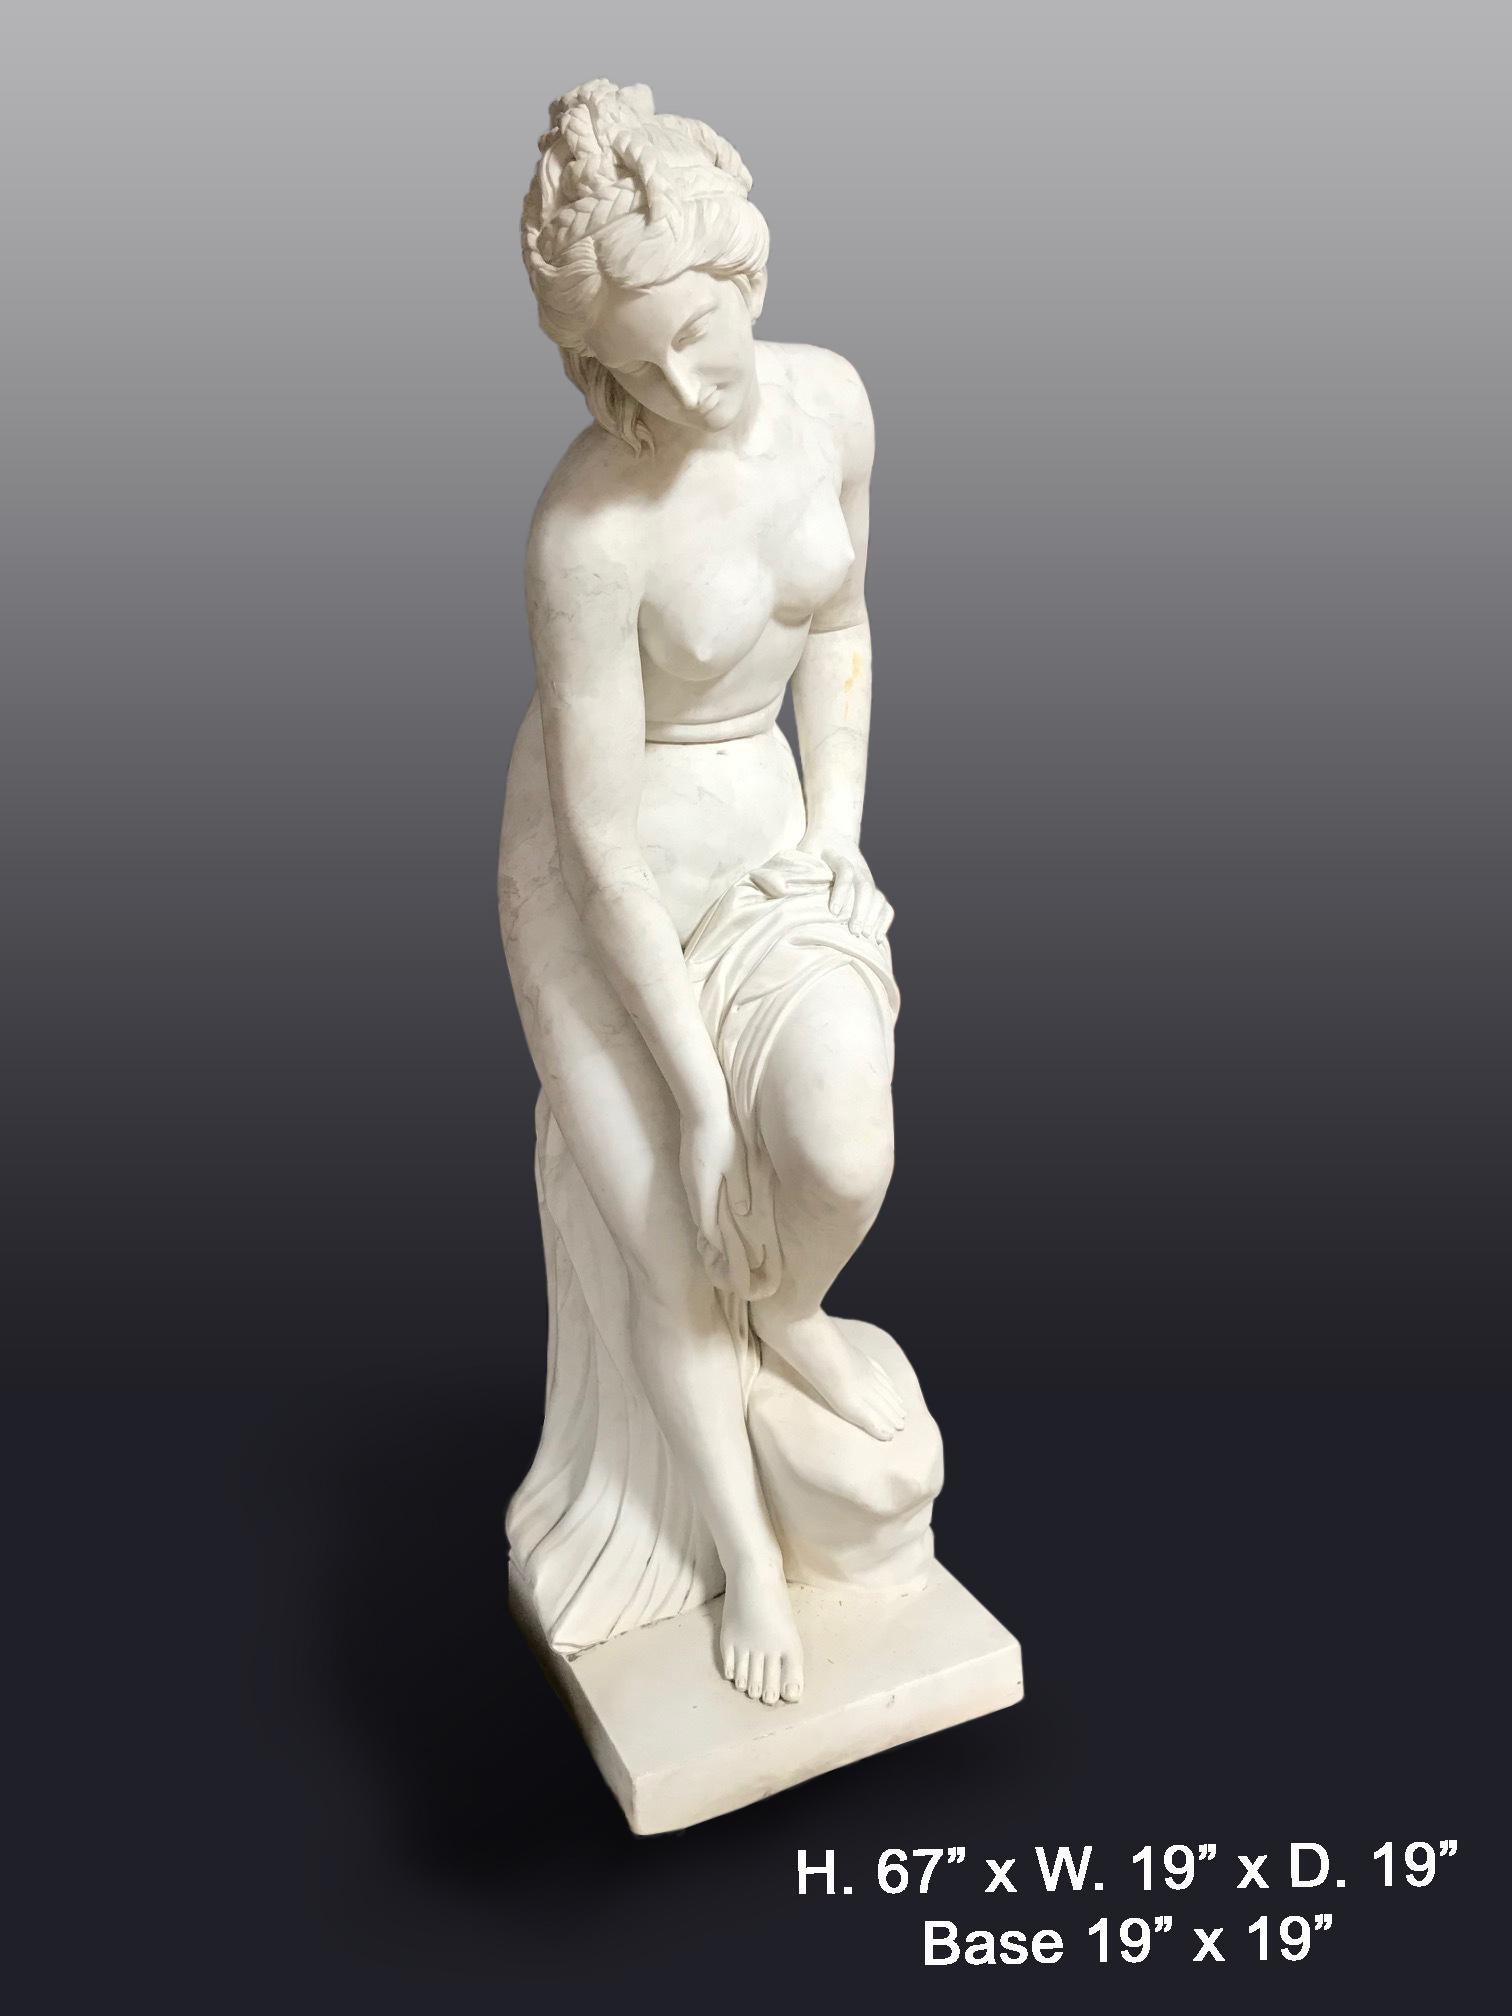 Extraordinary life size French carved white marble figure of nude Diana after bath, second half of the 20th century. After a model from Etienne Maurice Falconet (1716-1791).
Meticulous attention has been given to every detail, her innocent state